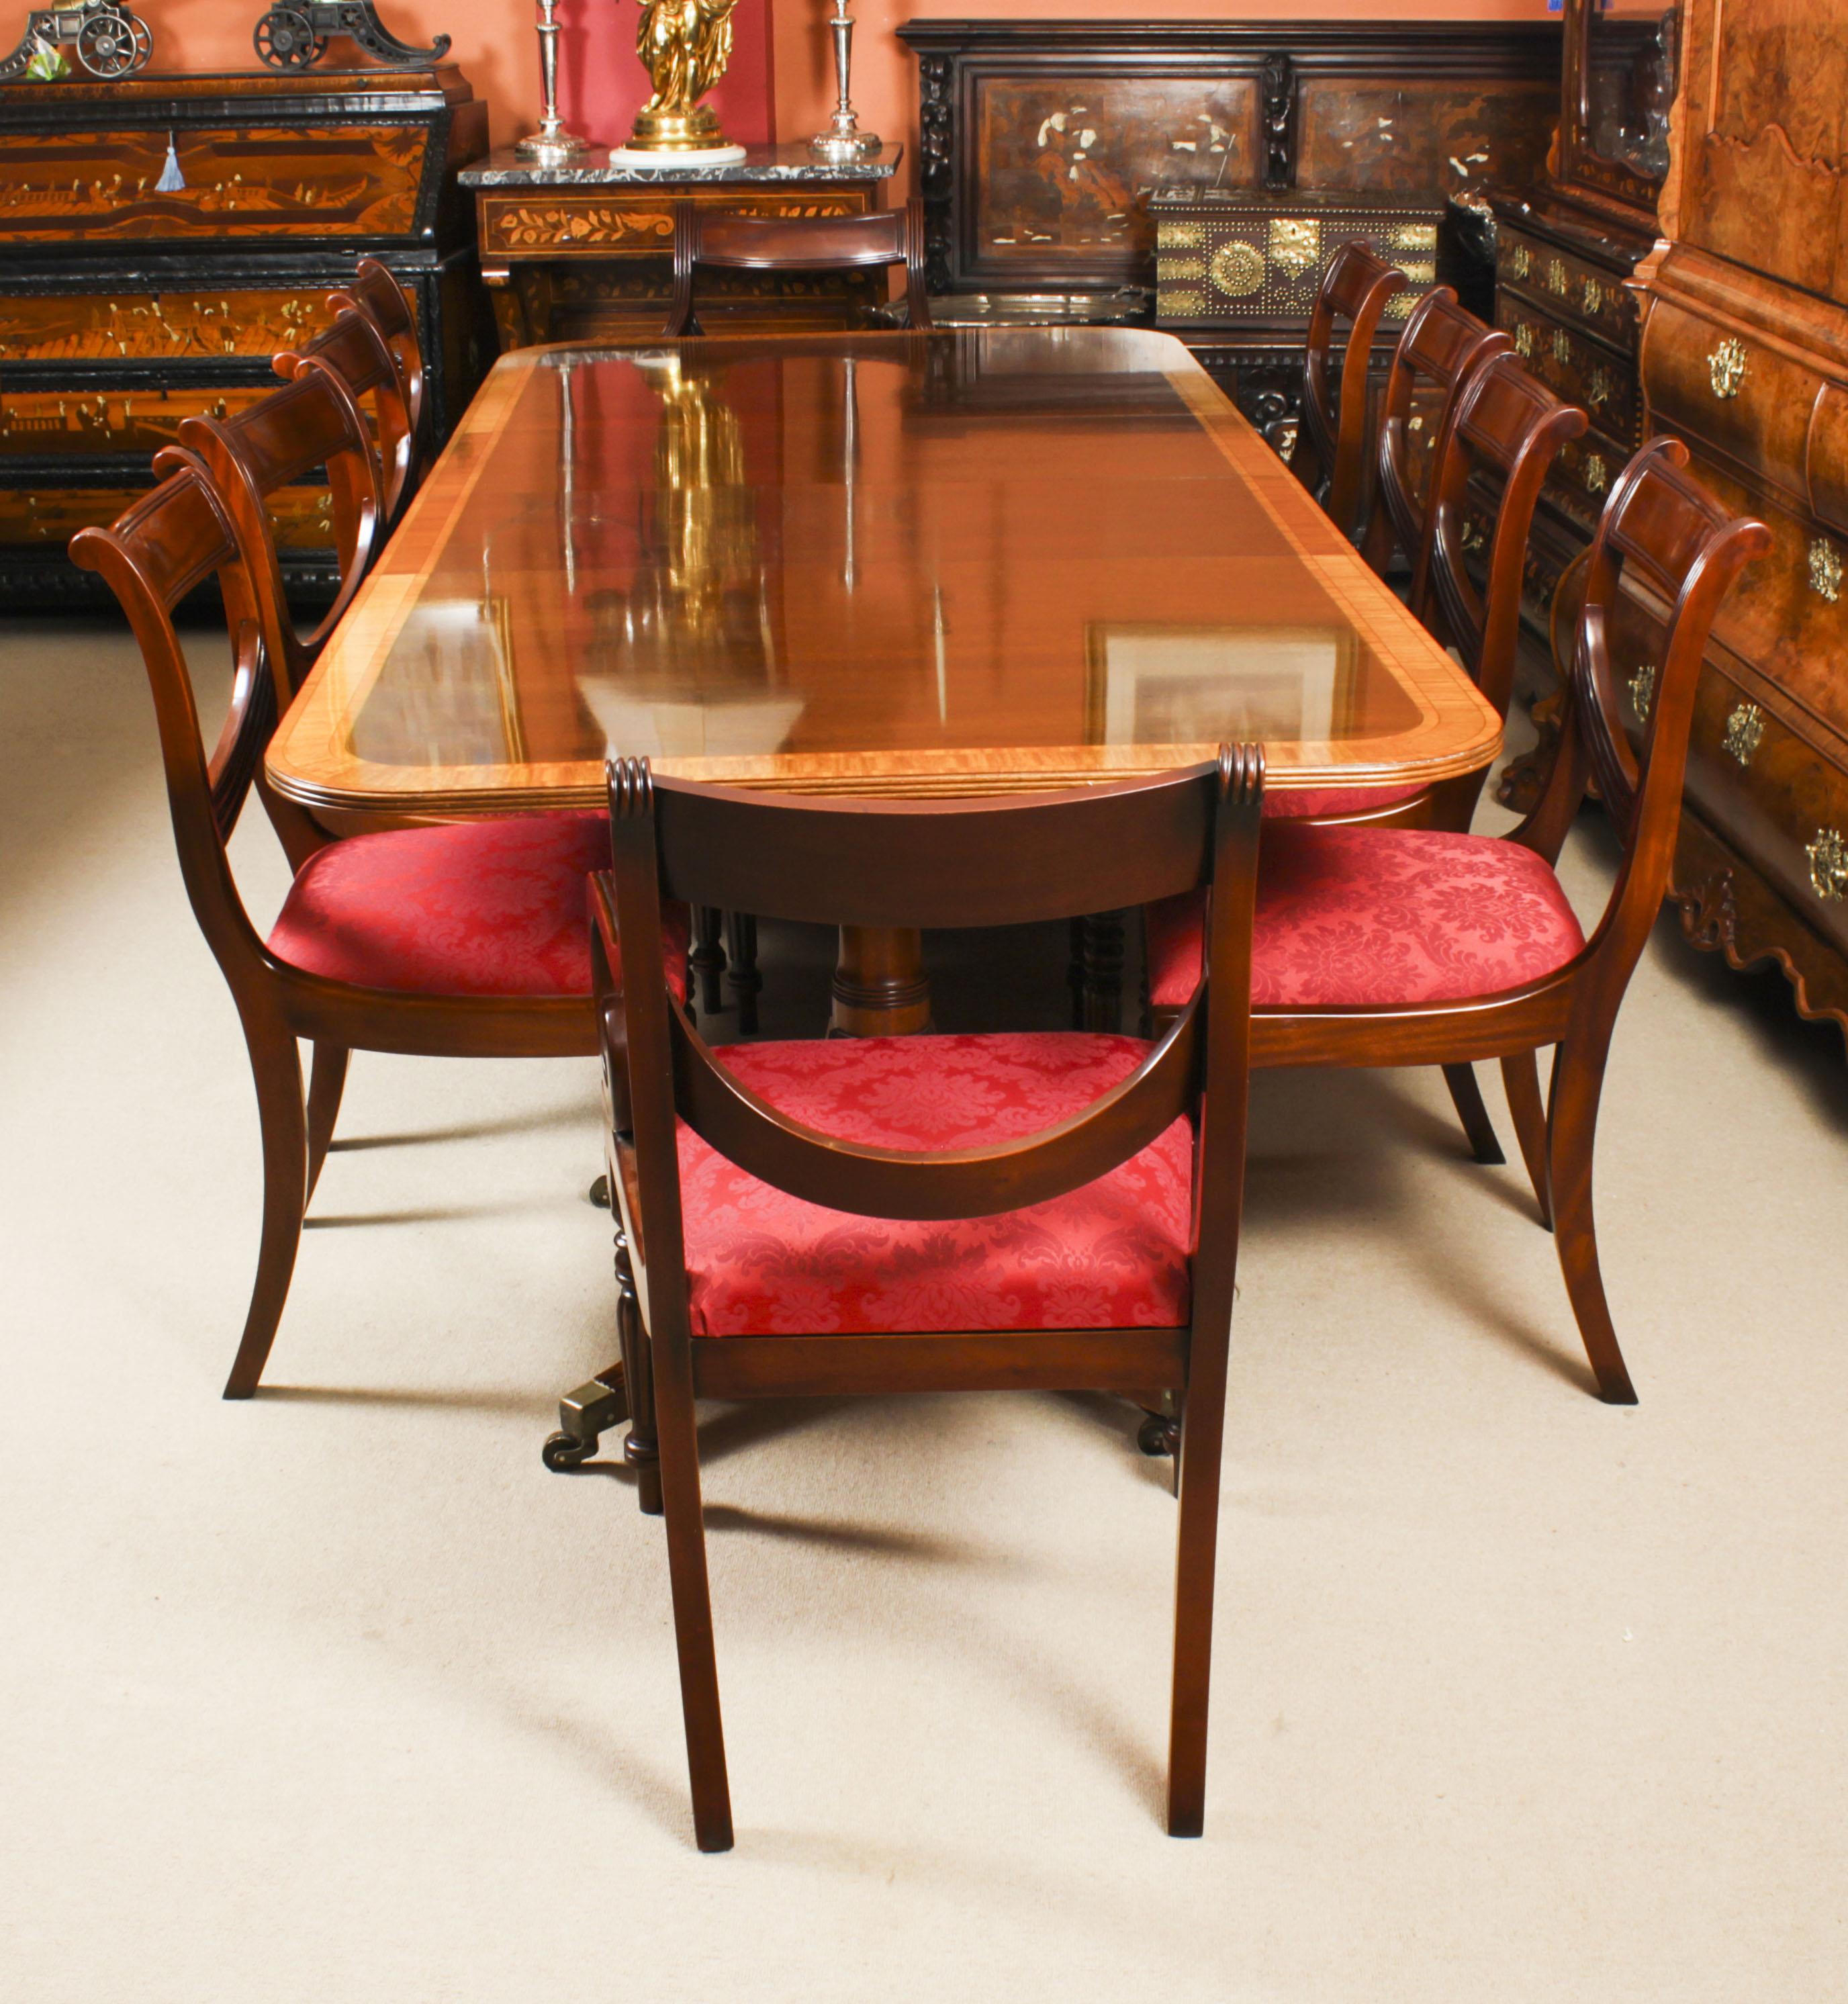 This is fabulous Vintage Regency Revival dining table by the master cabinet maker William Tillman Circa 1980 in date with a set of ten Regency Revival swag back dining chairs.

The table is made of stunning solid flame mahogany with satinwood